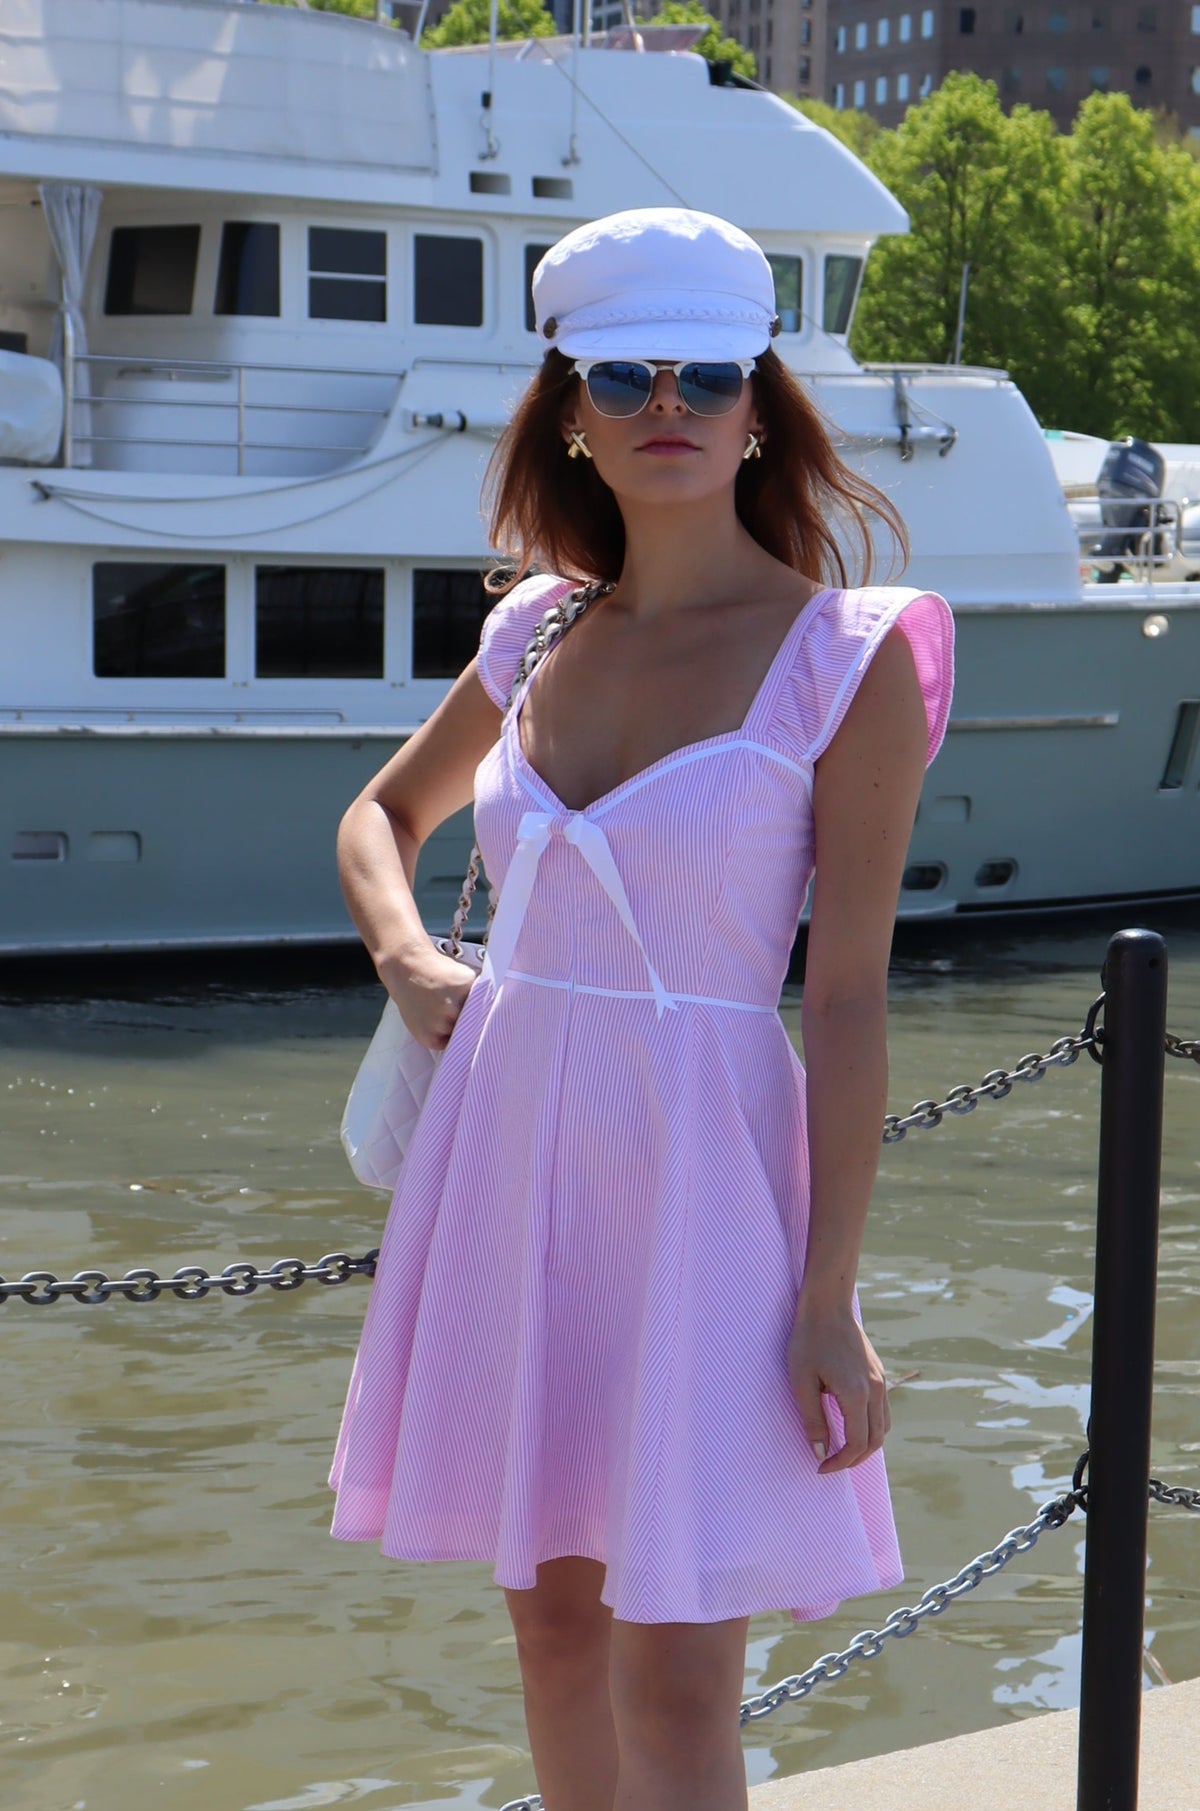 Model wearing a white hat and a pink and white seersucker dress with a white bow in front of a white boat.